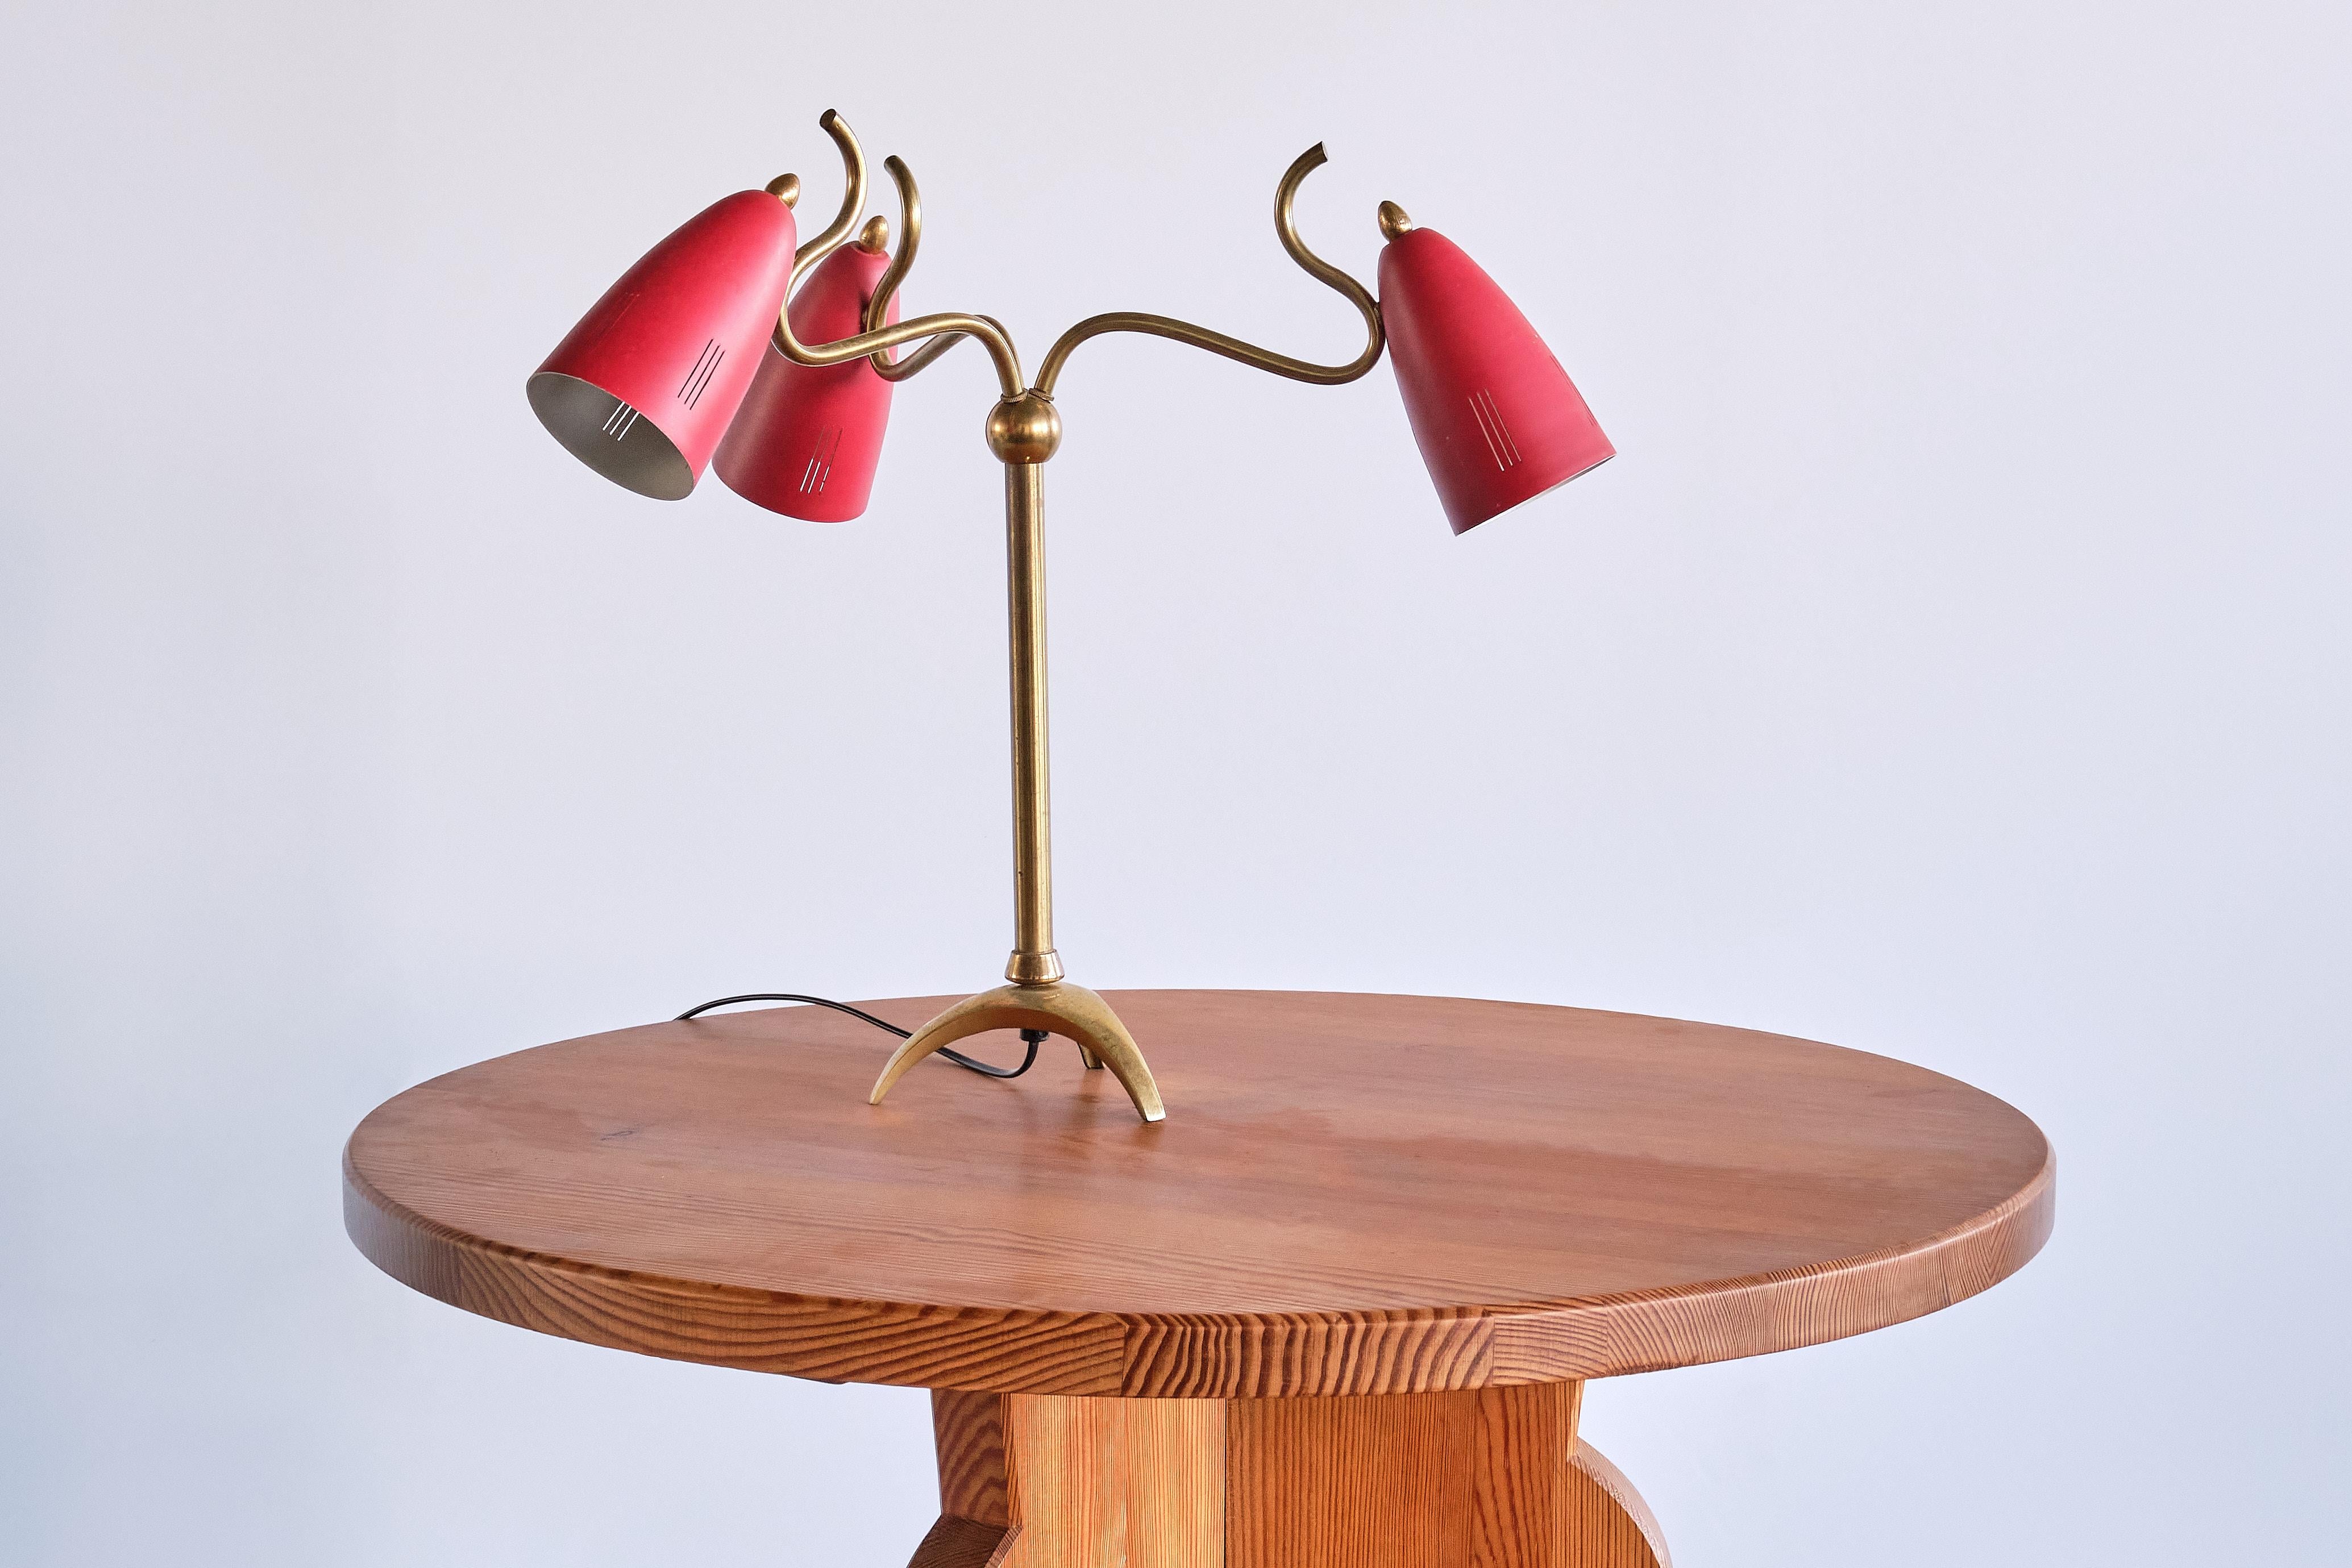 This exceptional three arm table lamp was produced in Italy in the early 1950s. The elegant design consists of a brass frame and three red shades.
The brass frame with a central, slightly raised tripod base and tubular central stem ending in a